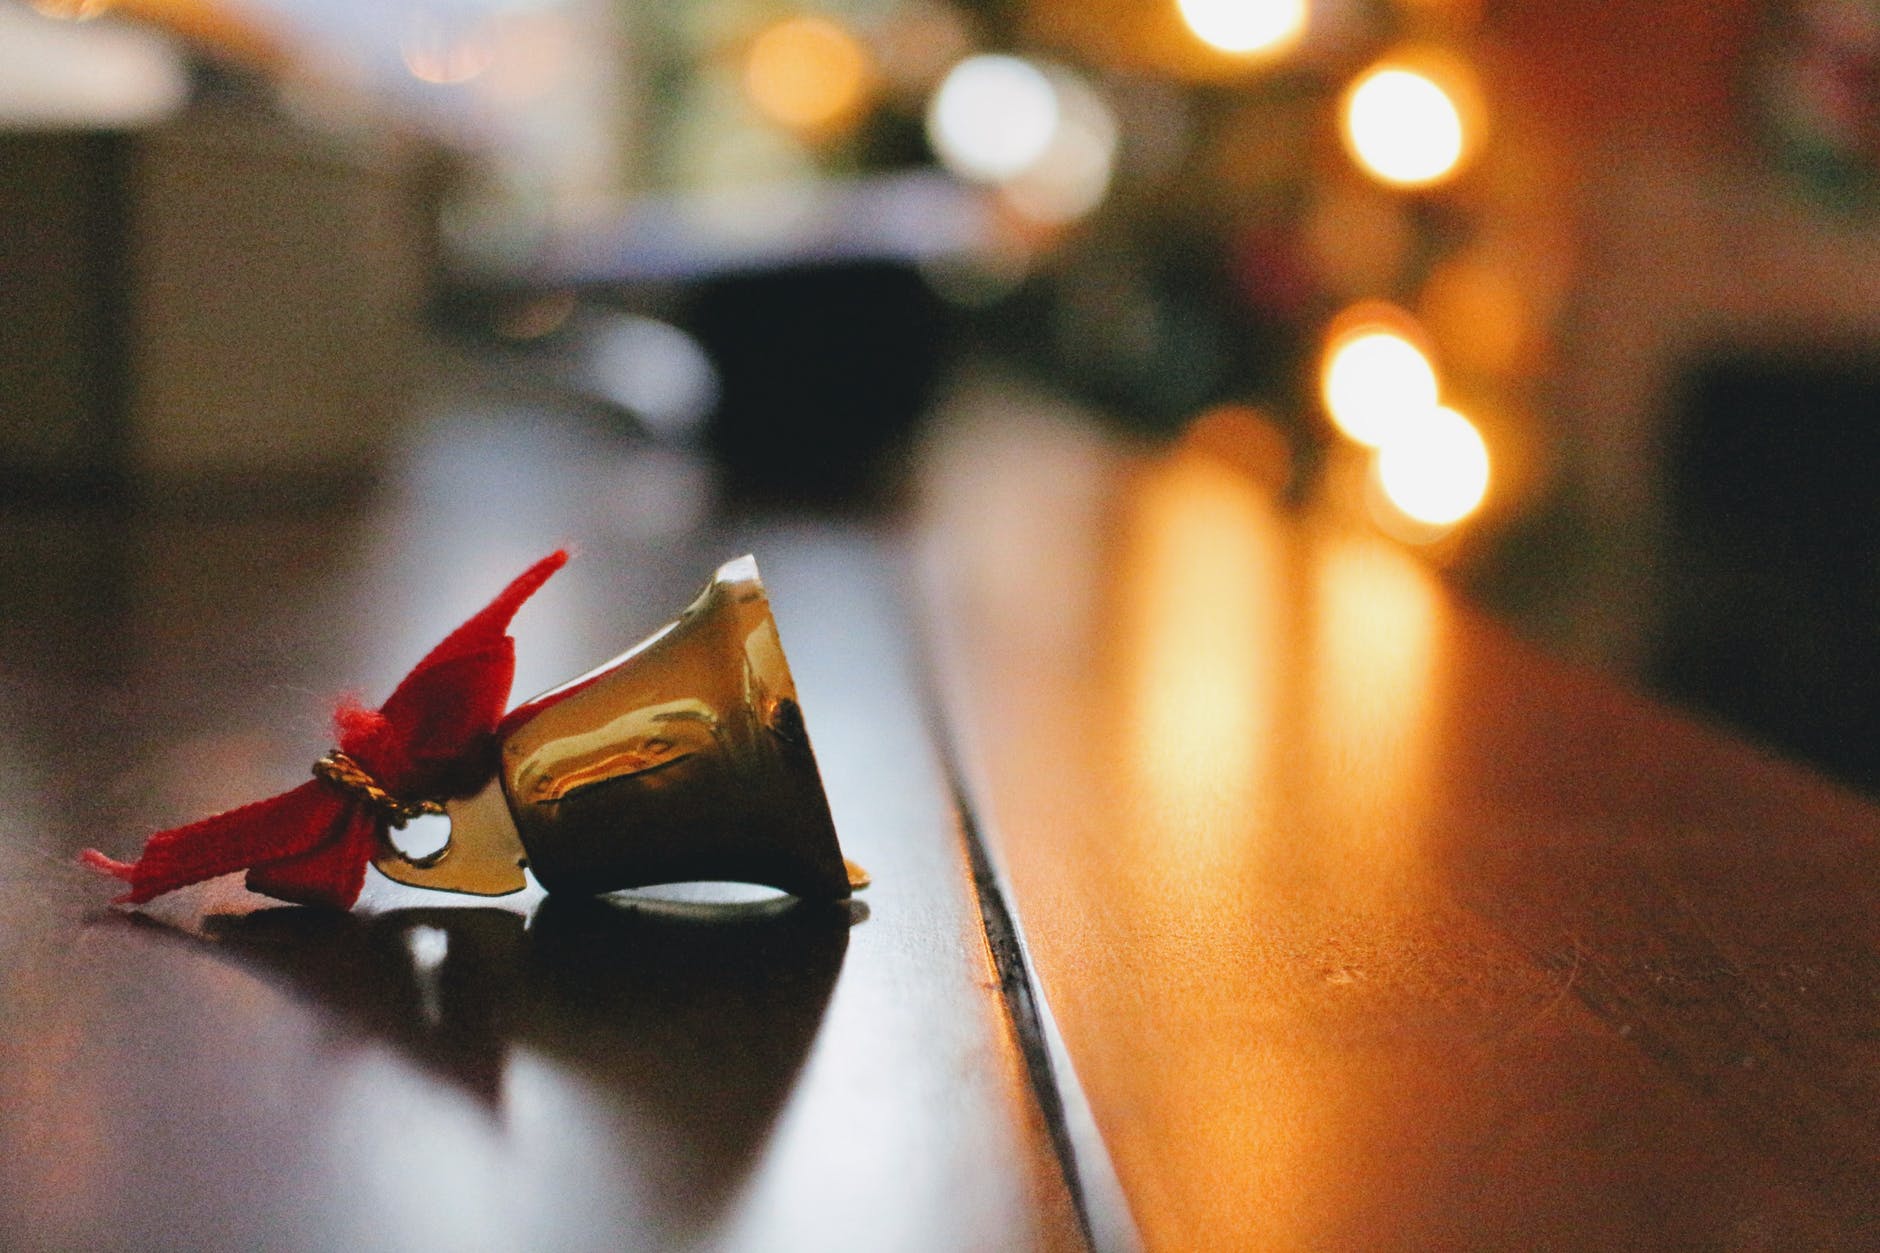 He opened his dream hotel and kept Sandra's bell. | Source: Pexels